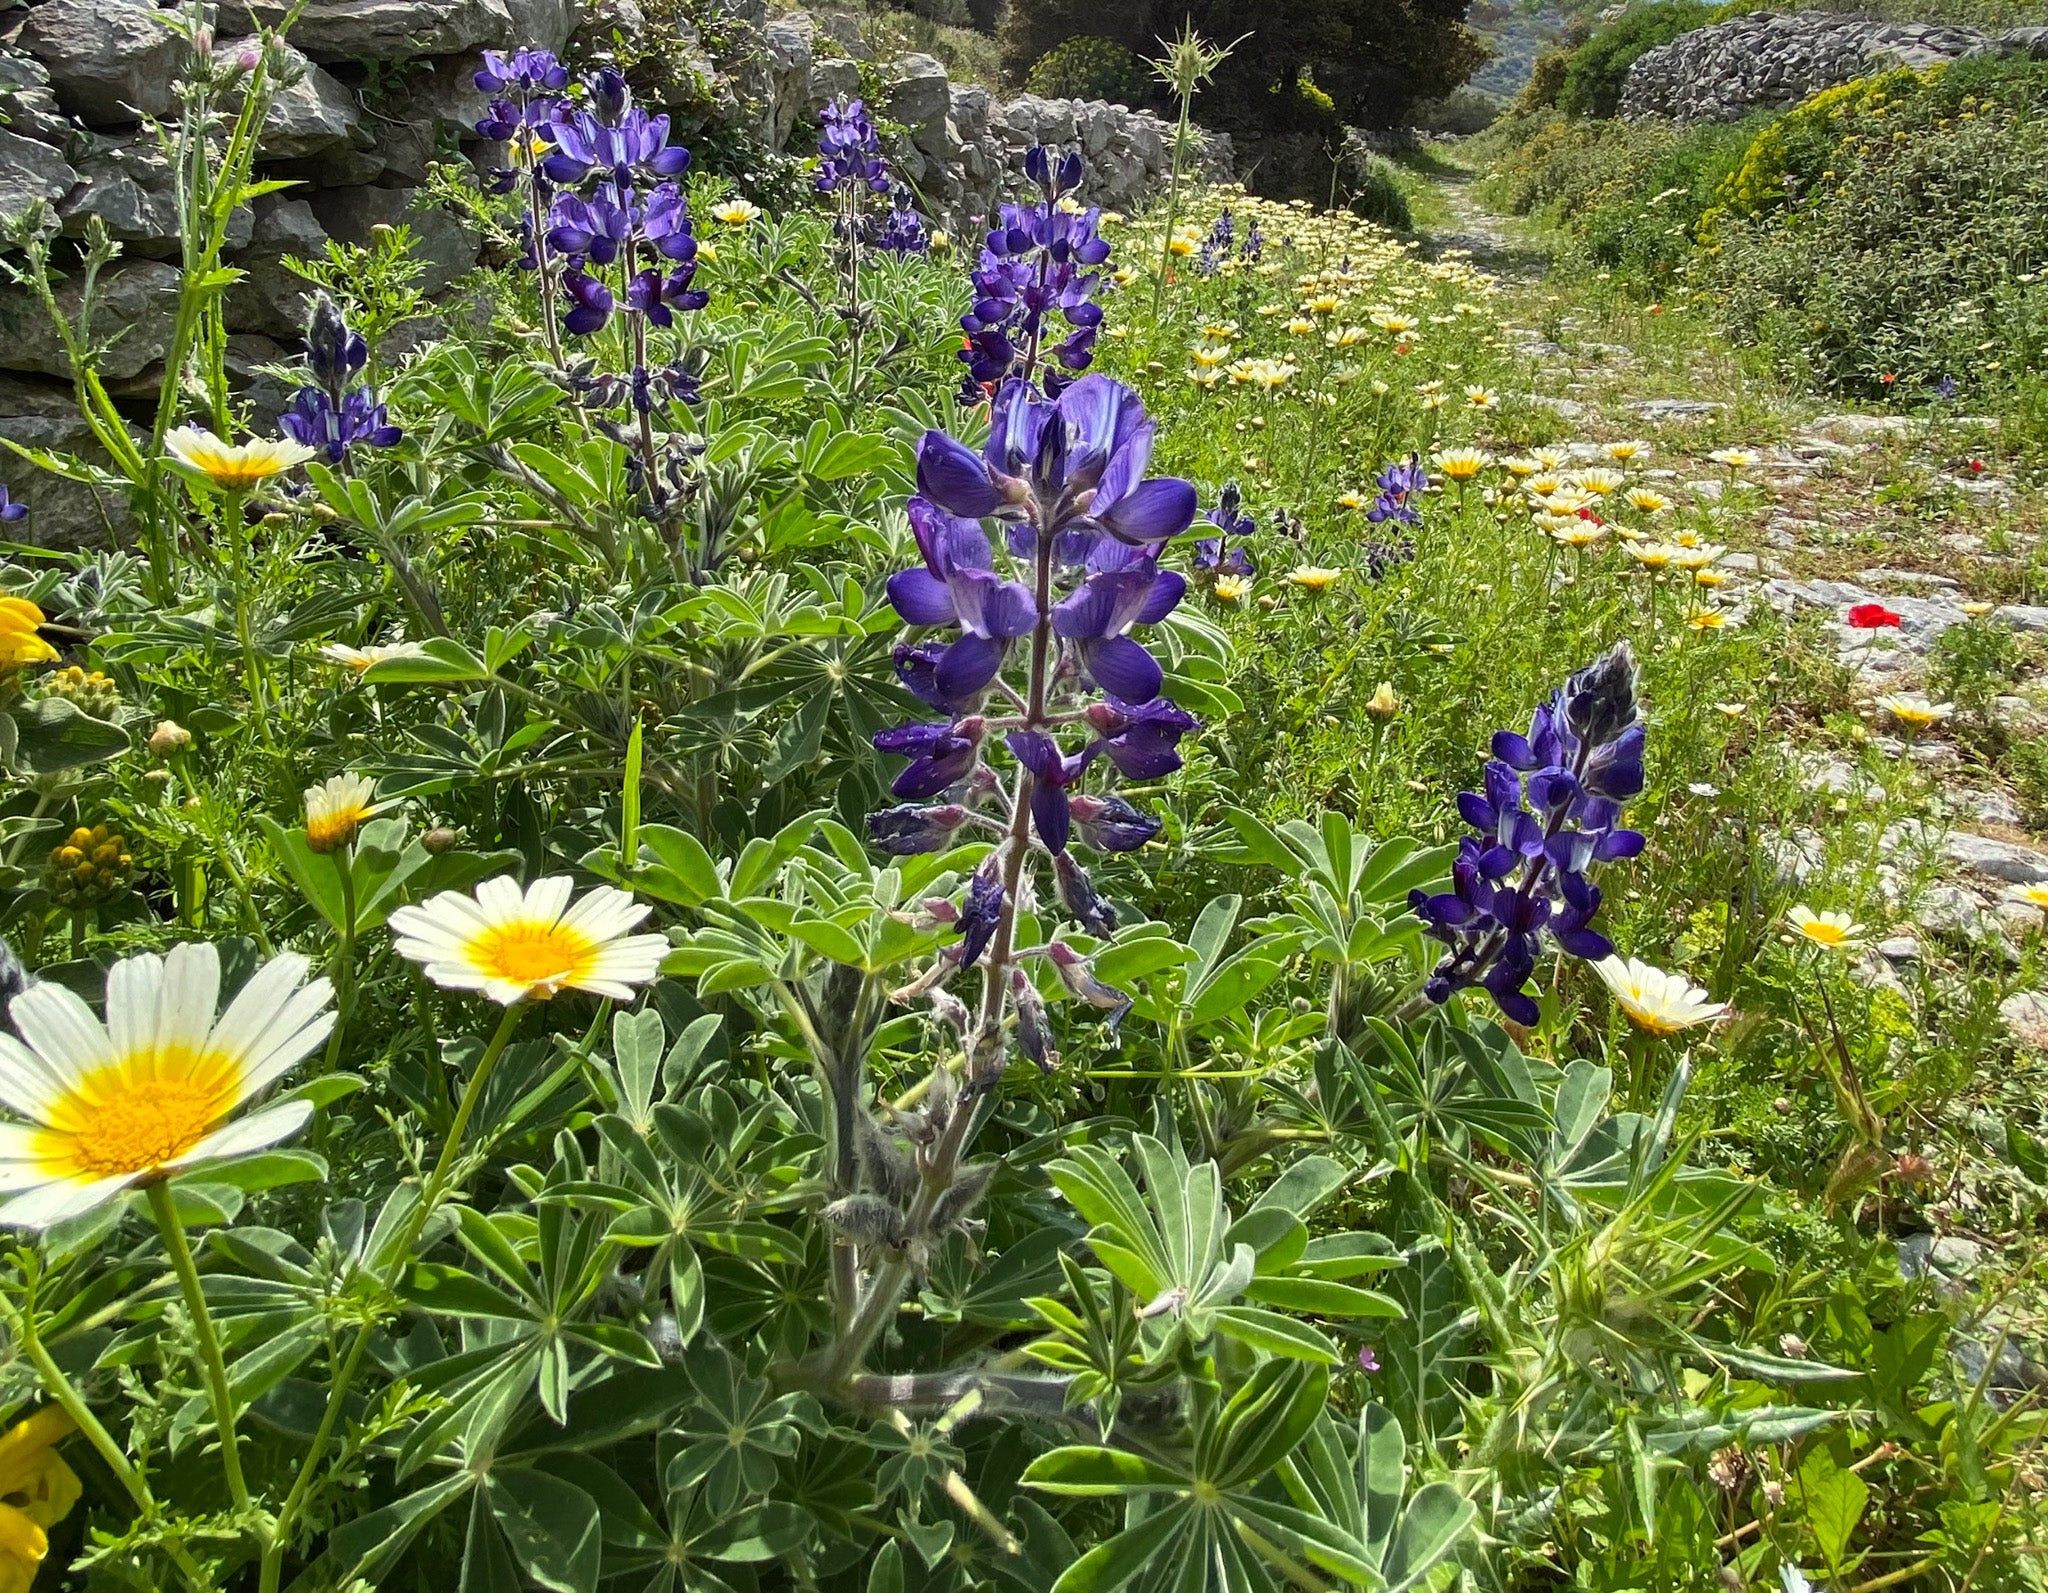 Lupins and crown daisies are among over 900 flowering plants recorded on Naxos